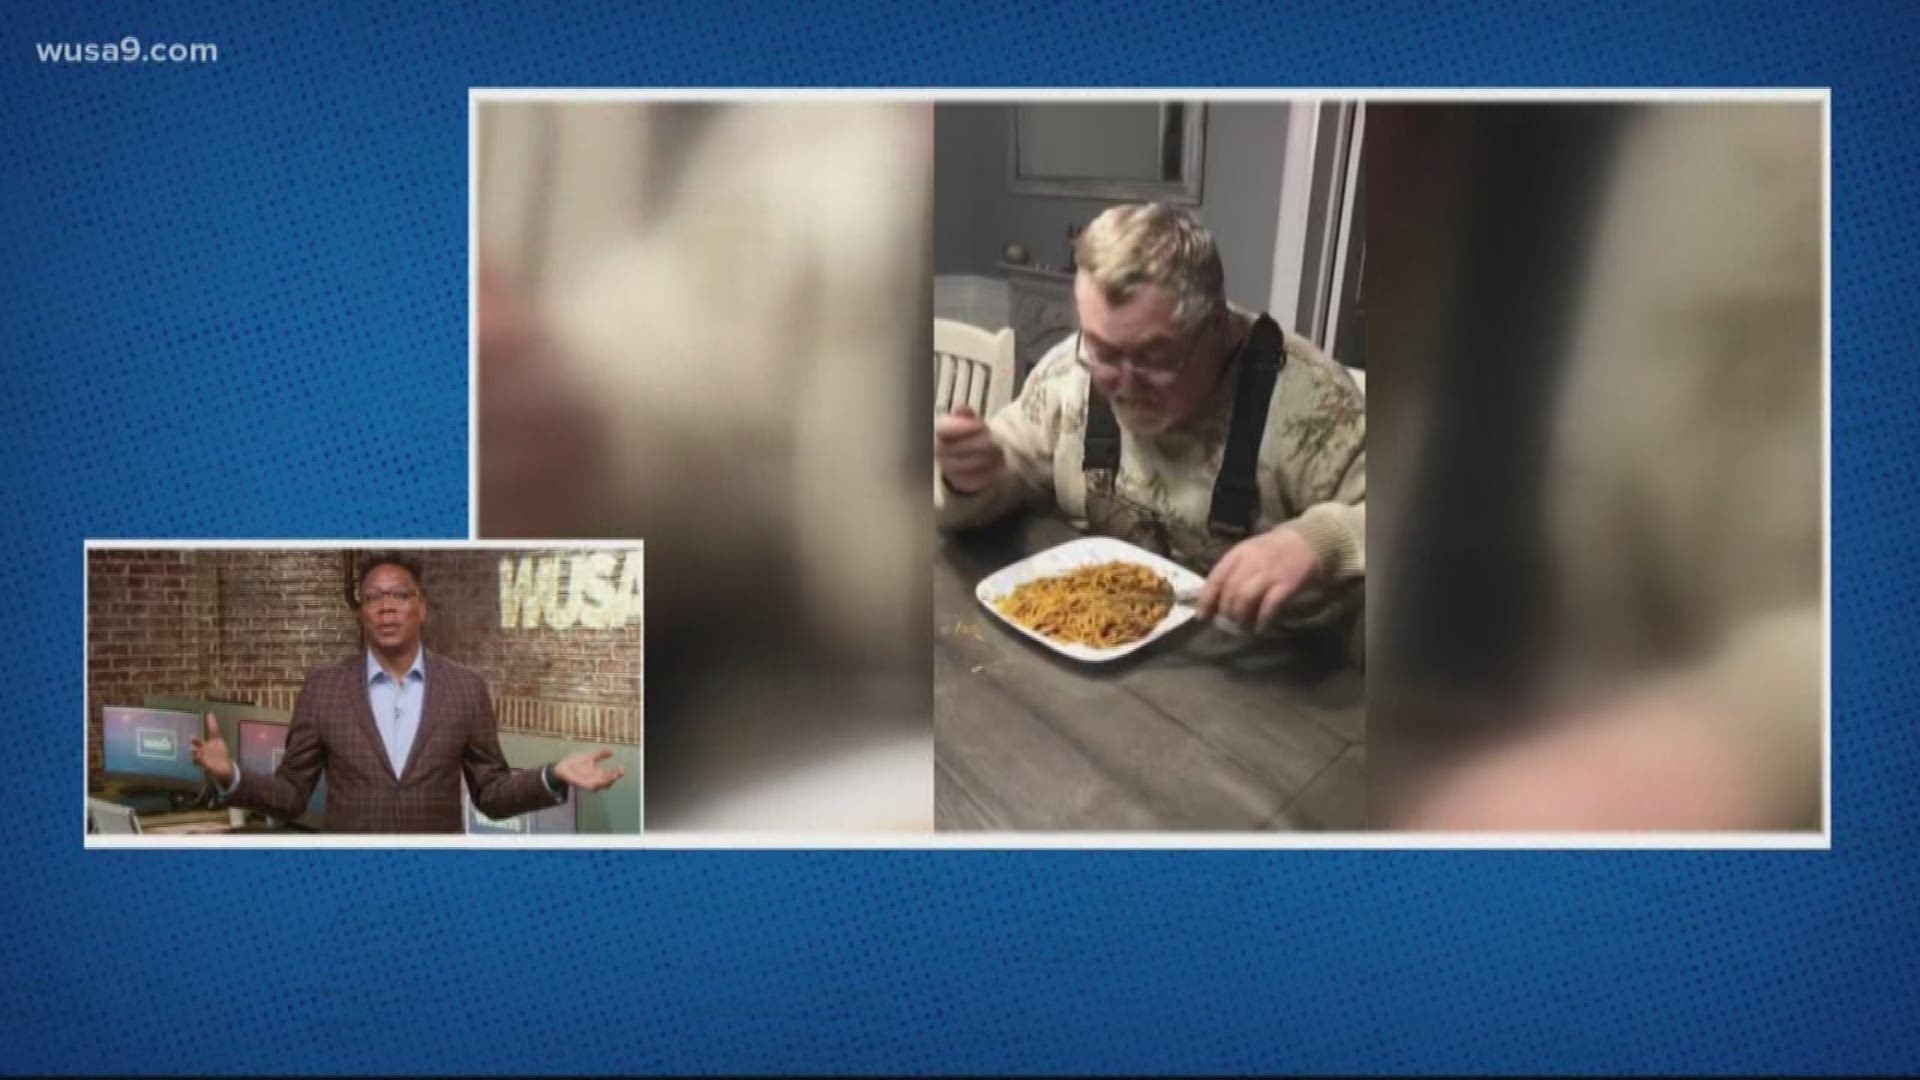 A man's unique way of eating spaghetti with scissors has gone viral on social media. This is In Other News with news that isn't on your radar but should be.